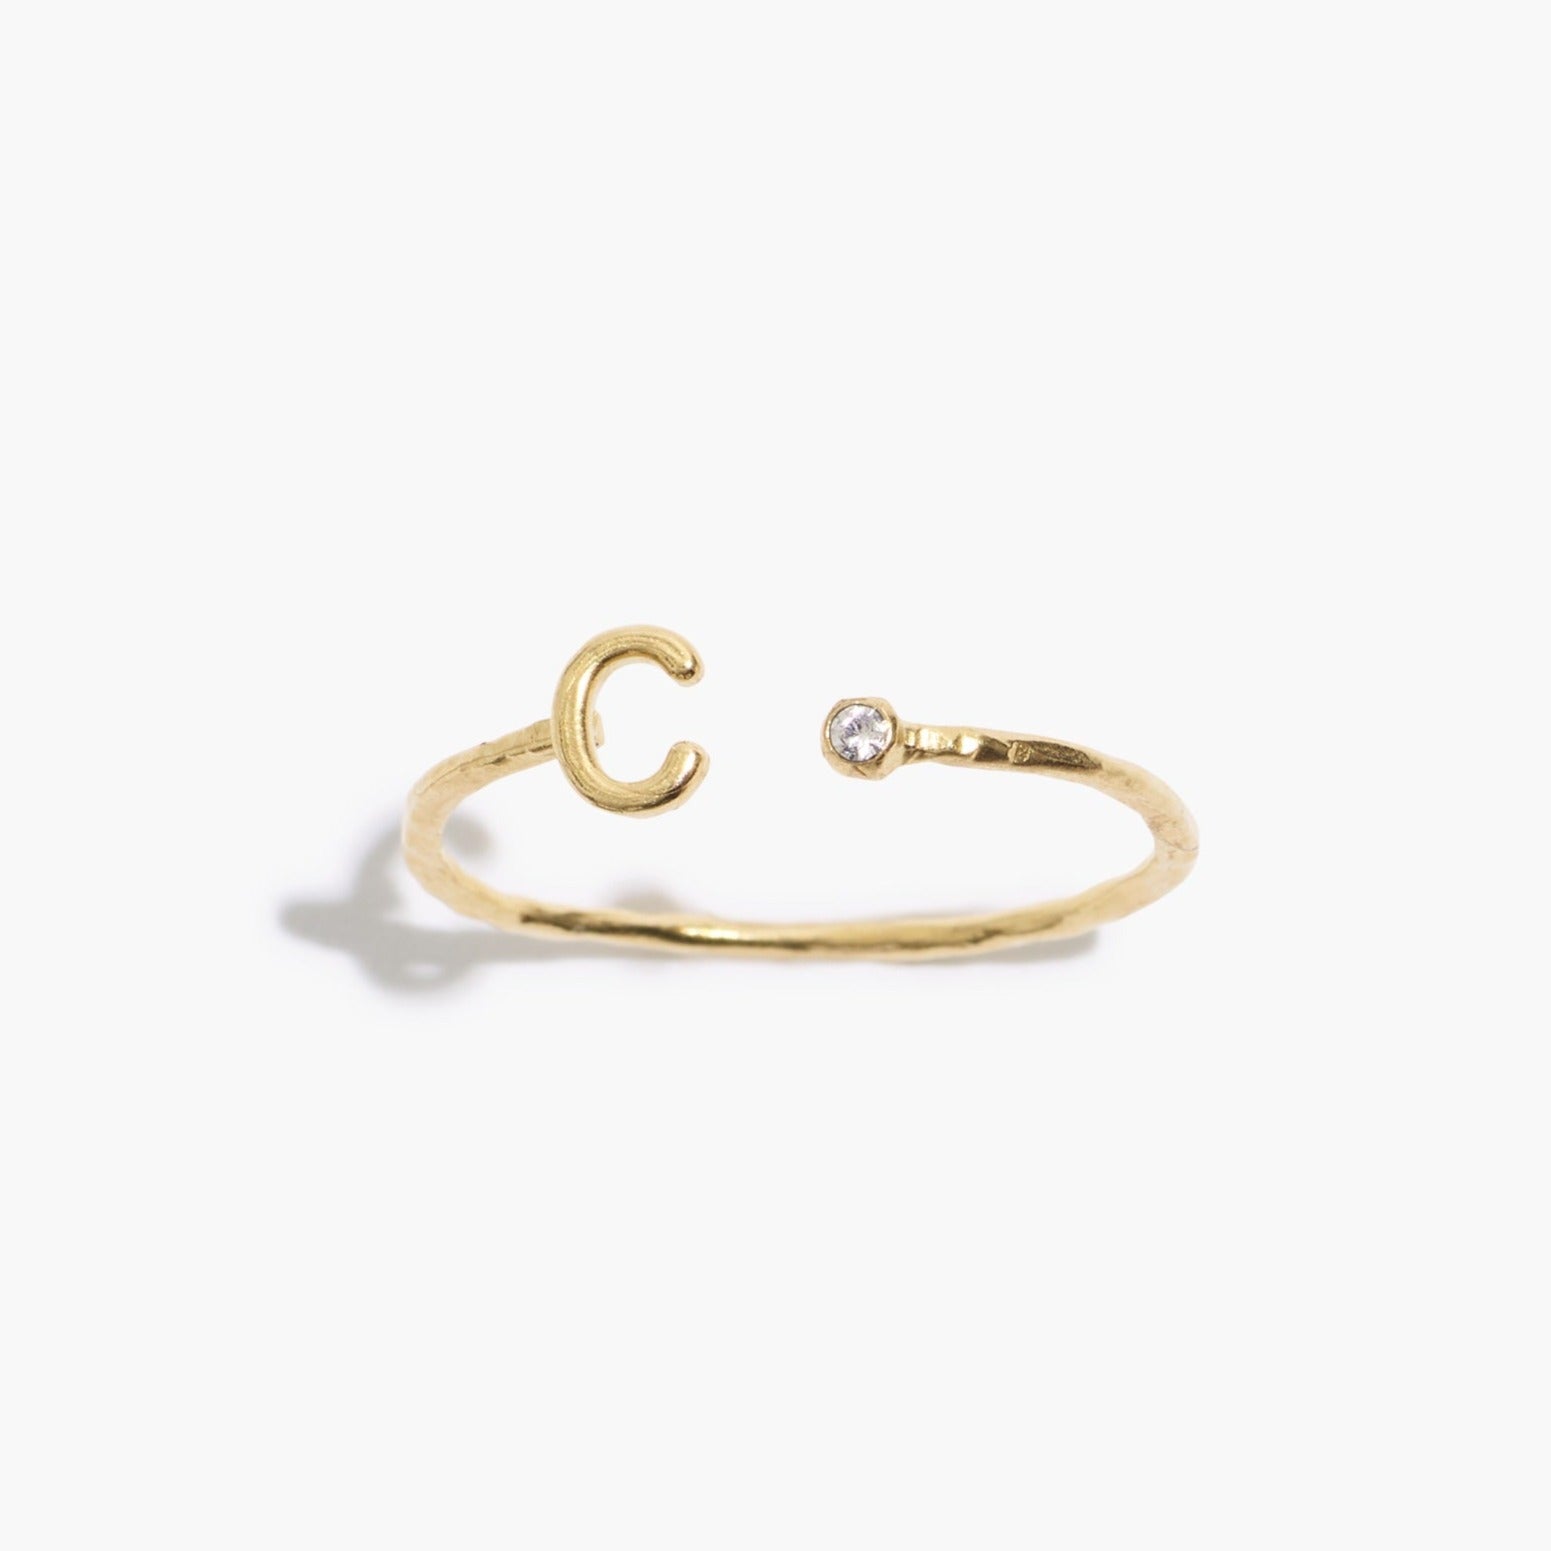 C_Katie_Dean_Initial_Ring_made in America, delicate adjustable stacking ring